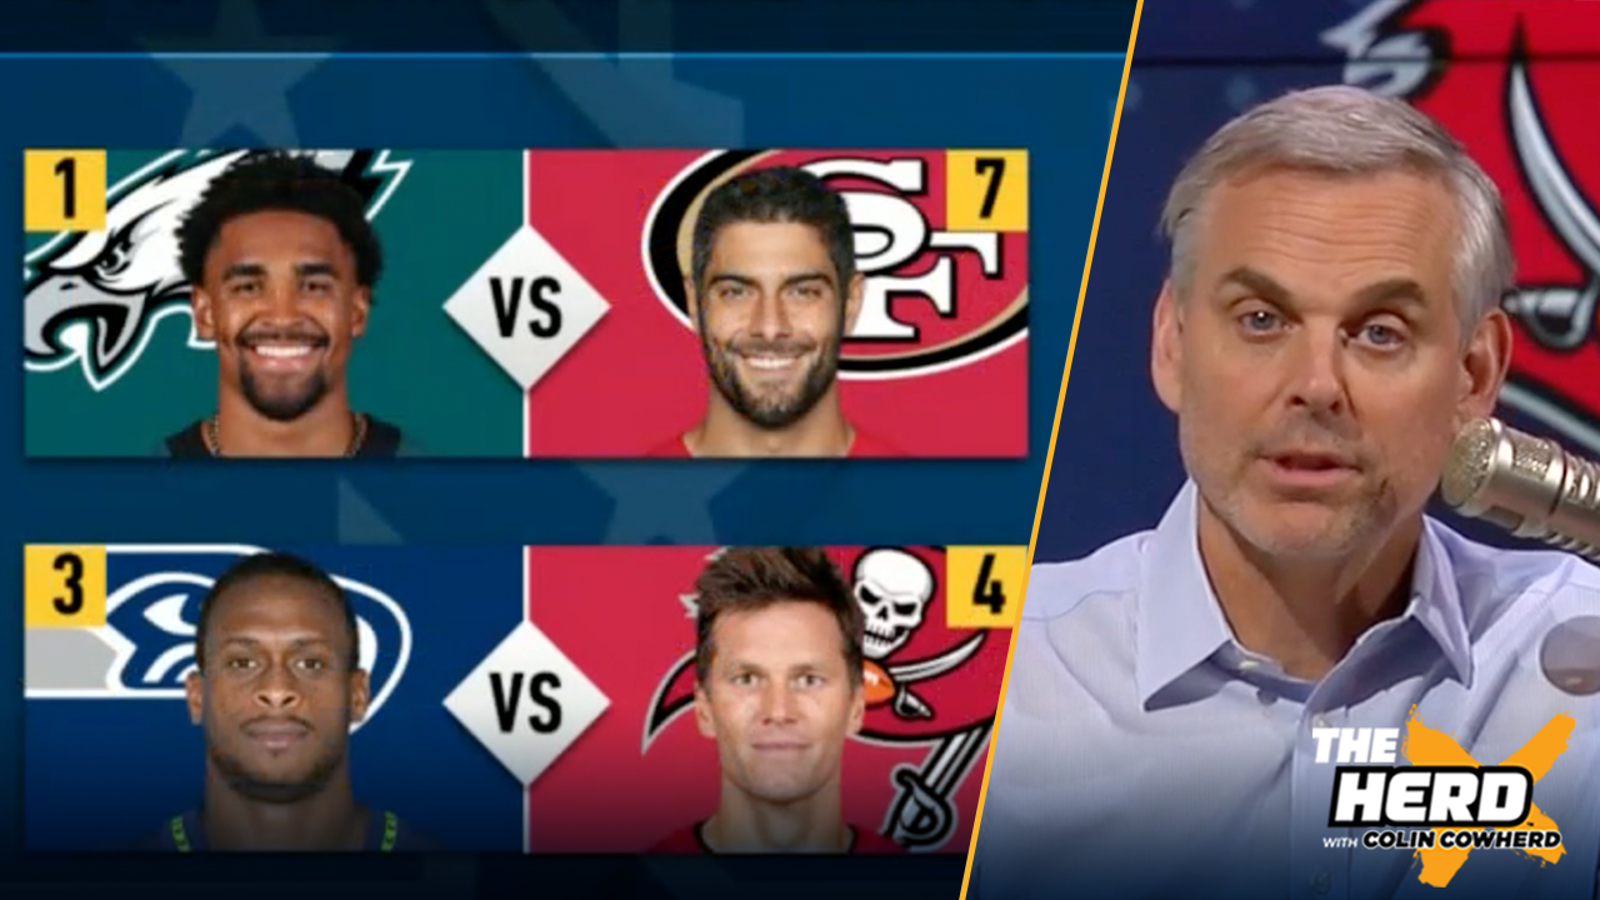 Colin plays Playoff QB Face Bracket for the NFC & AFC